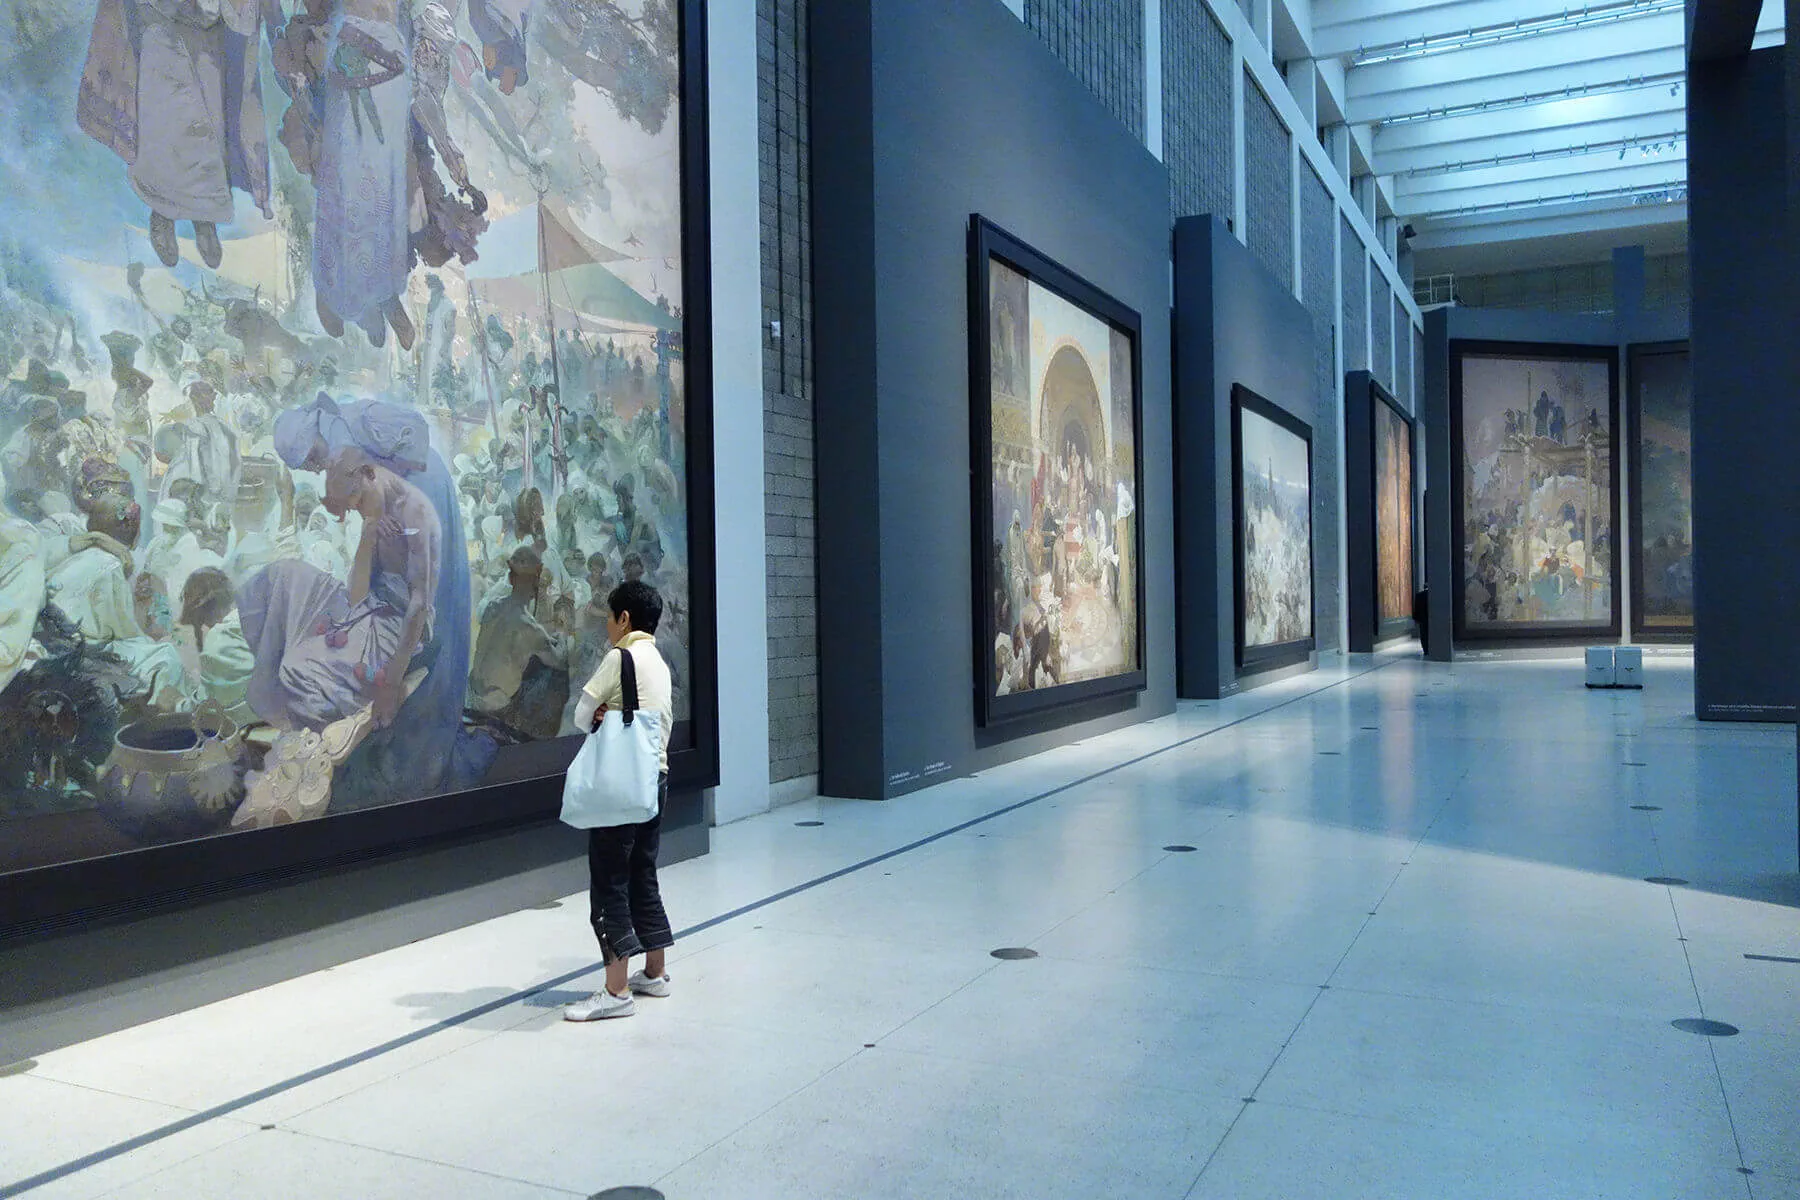 Viewing the masterful canvases of Mucha’s "Slav Epic" is a forceful artistic experience